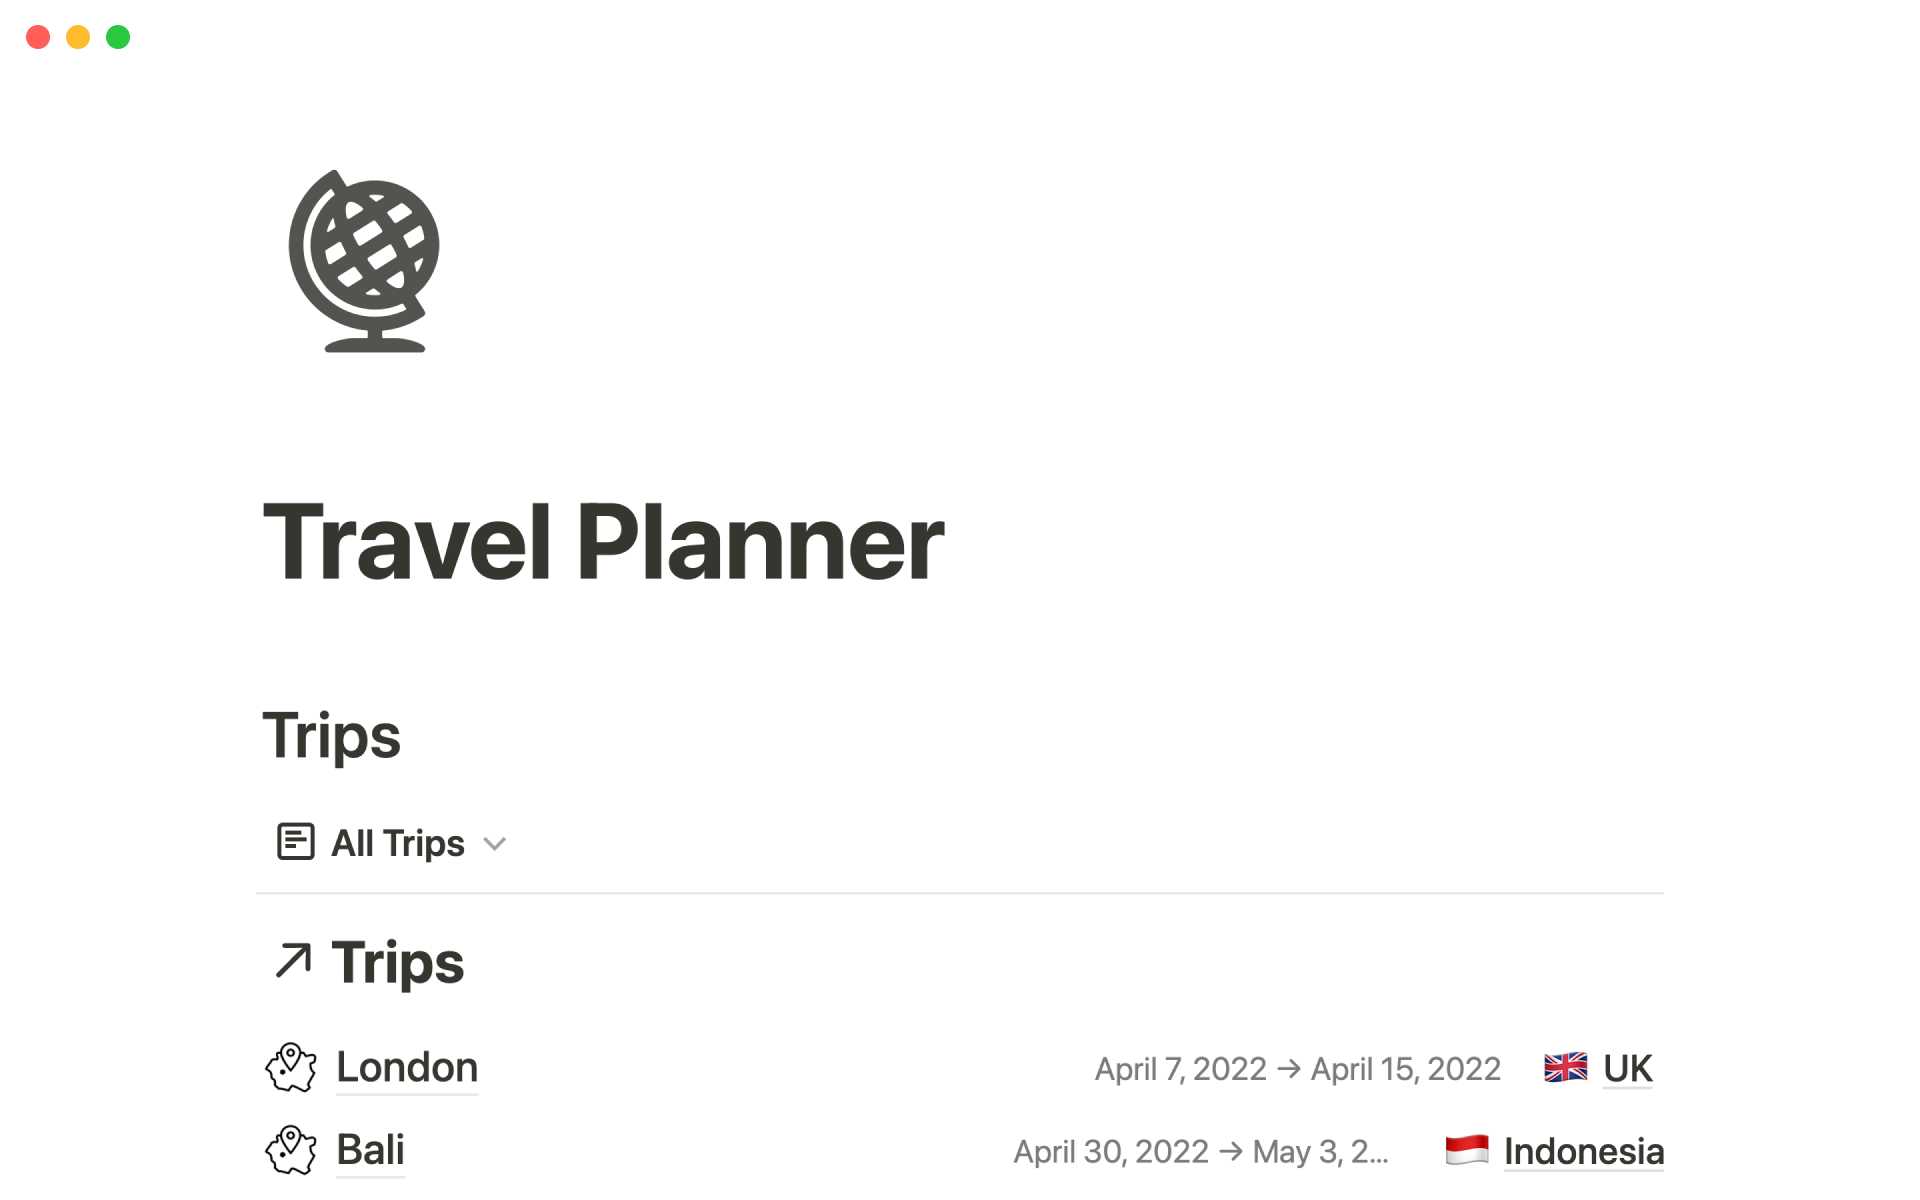 Consolidates travel planning to a single hub.